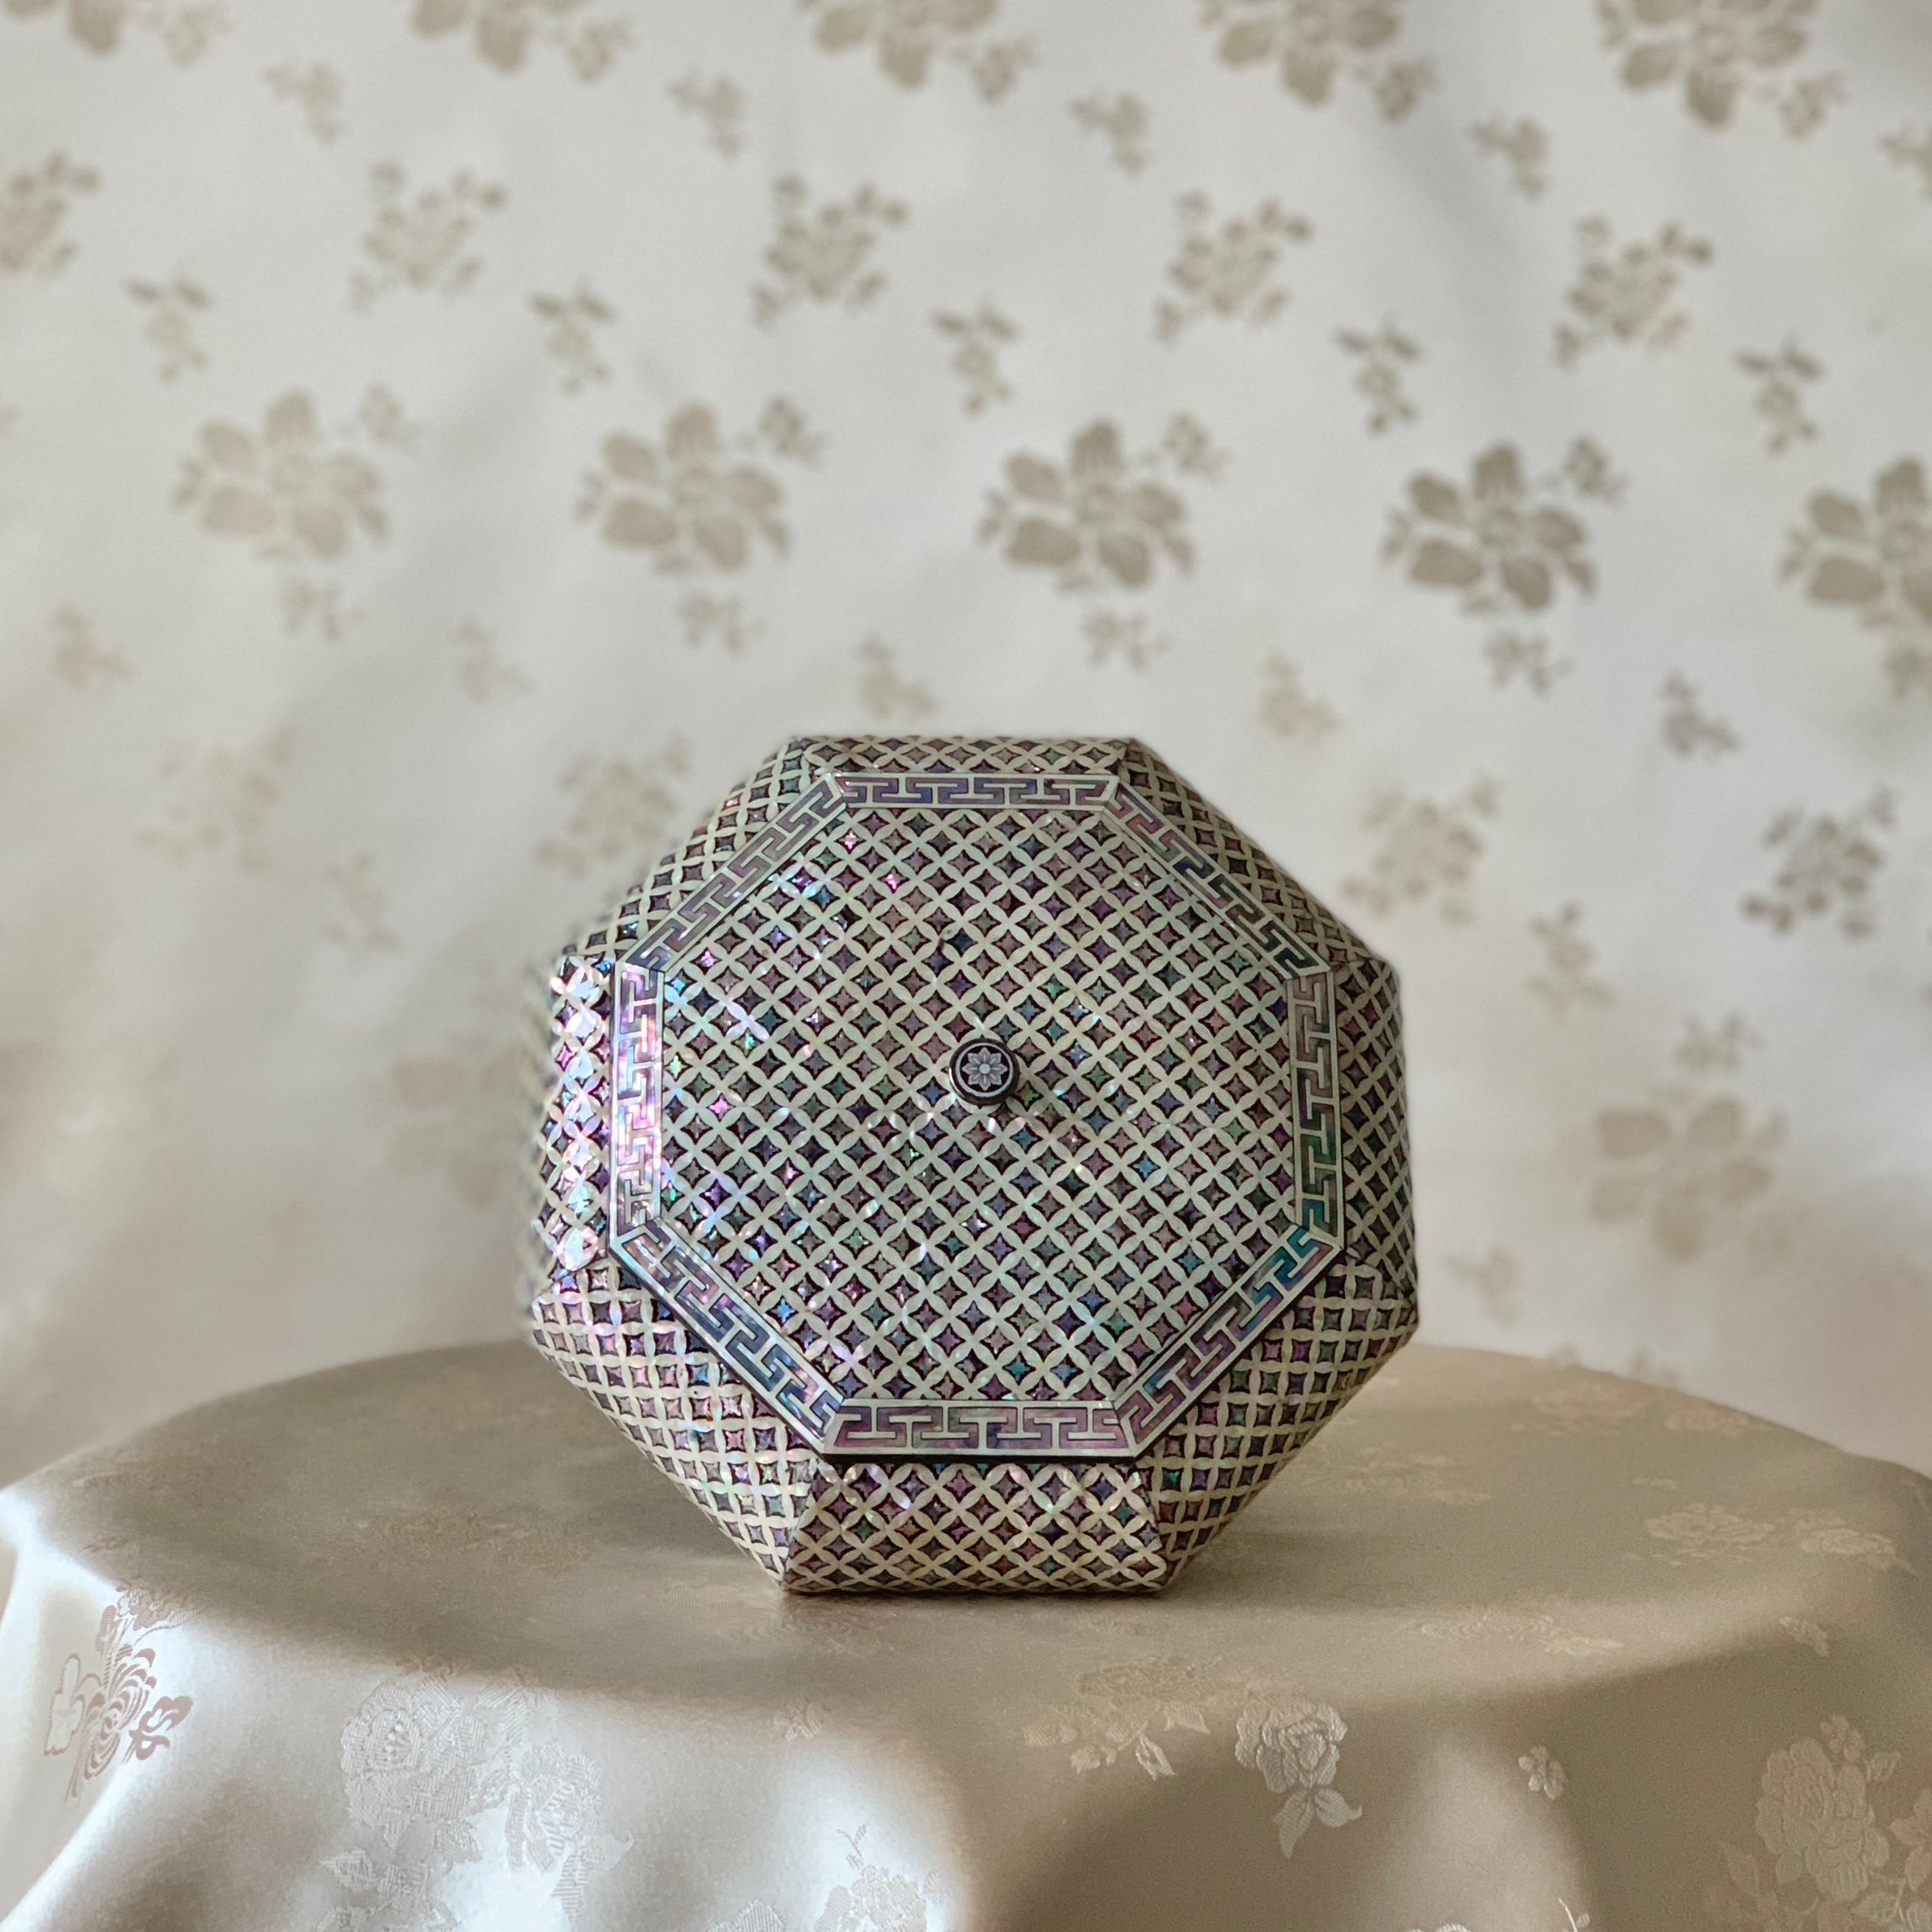 A traditional Korean jewelry box adorned with intricate mother of pearl and chilbo pattern.